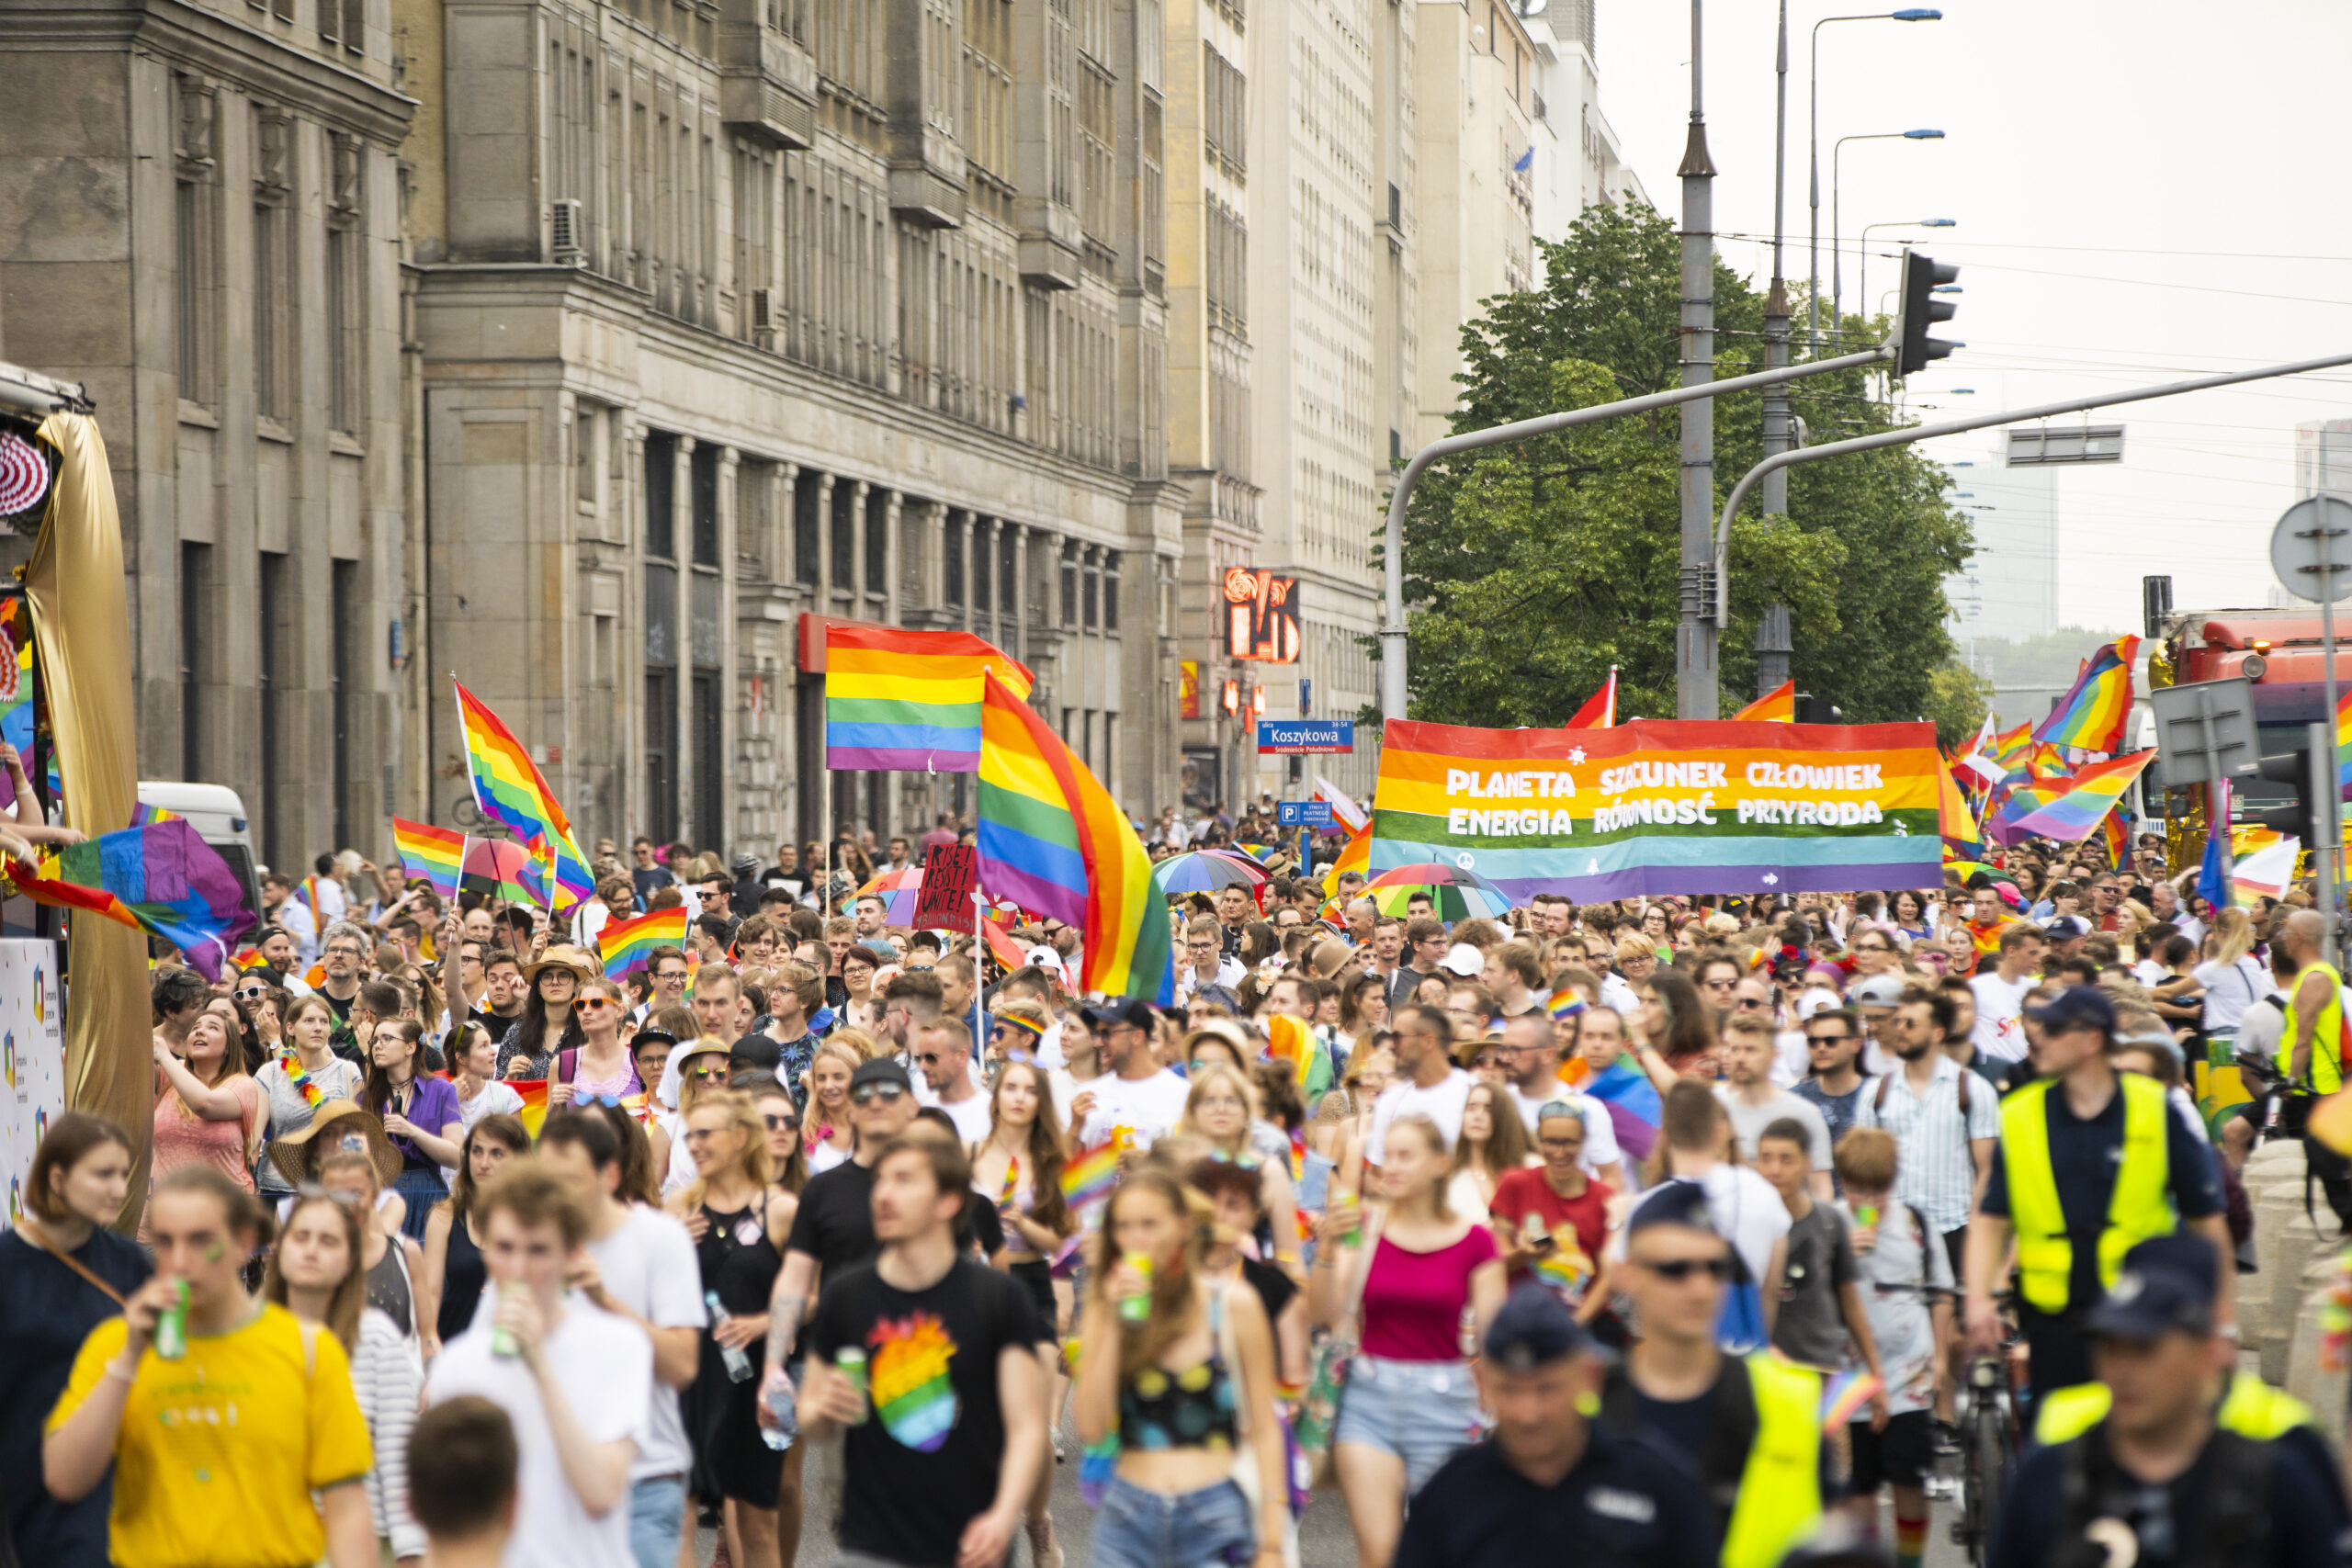 Bill banning LGBT parades submitted to Polish parliament